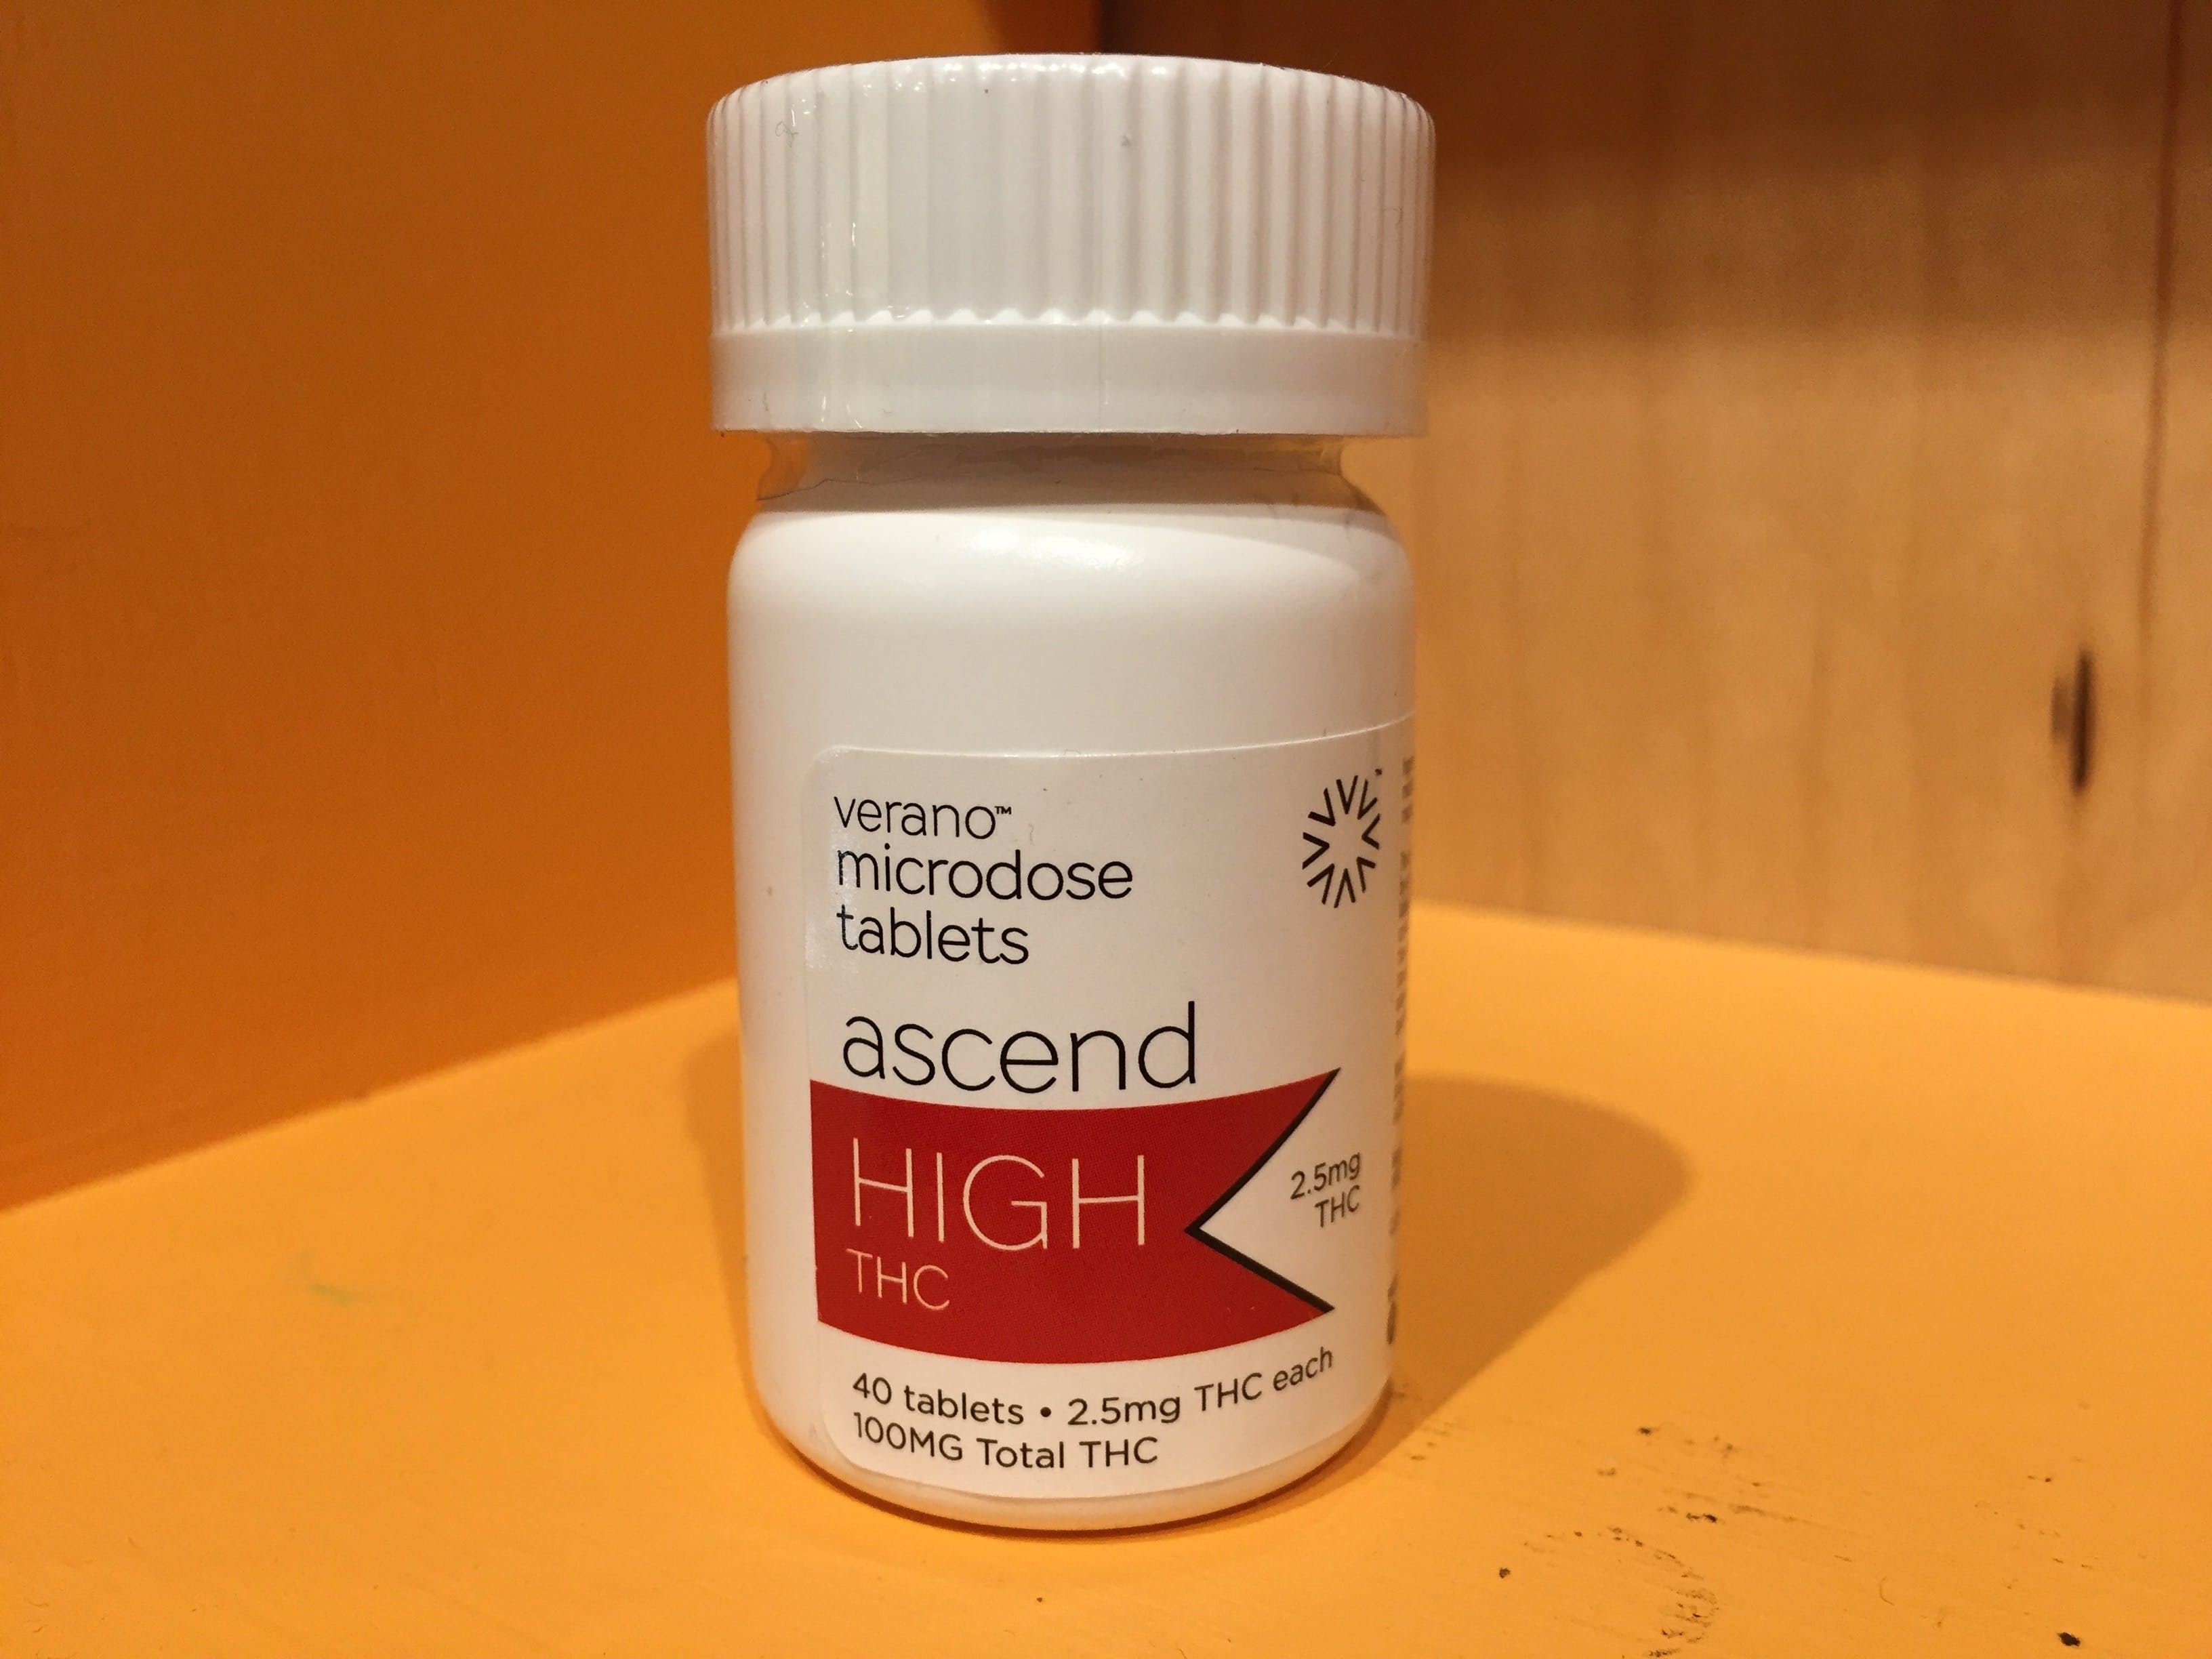 edible-ascend-thc-tablets-from-verano